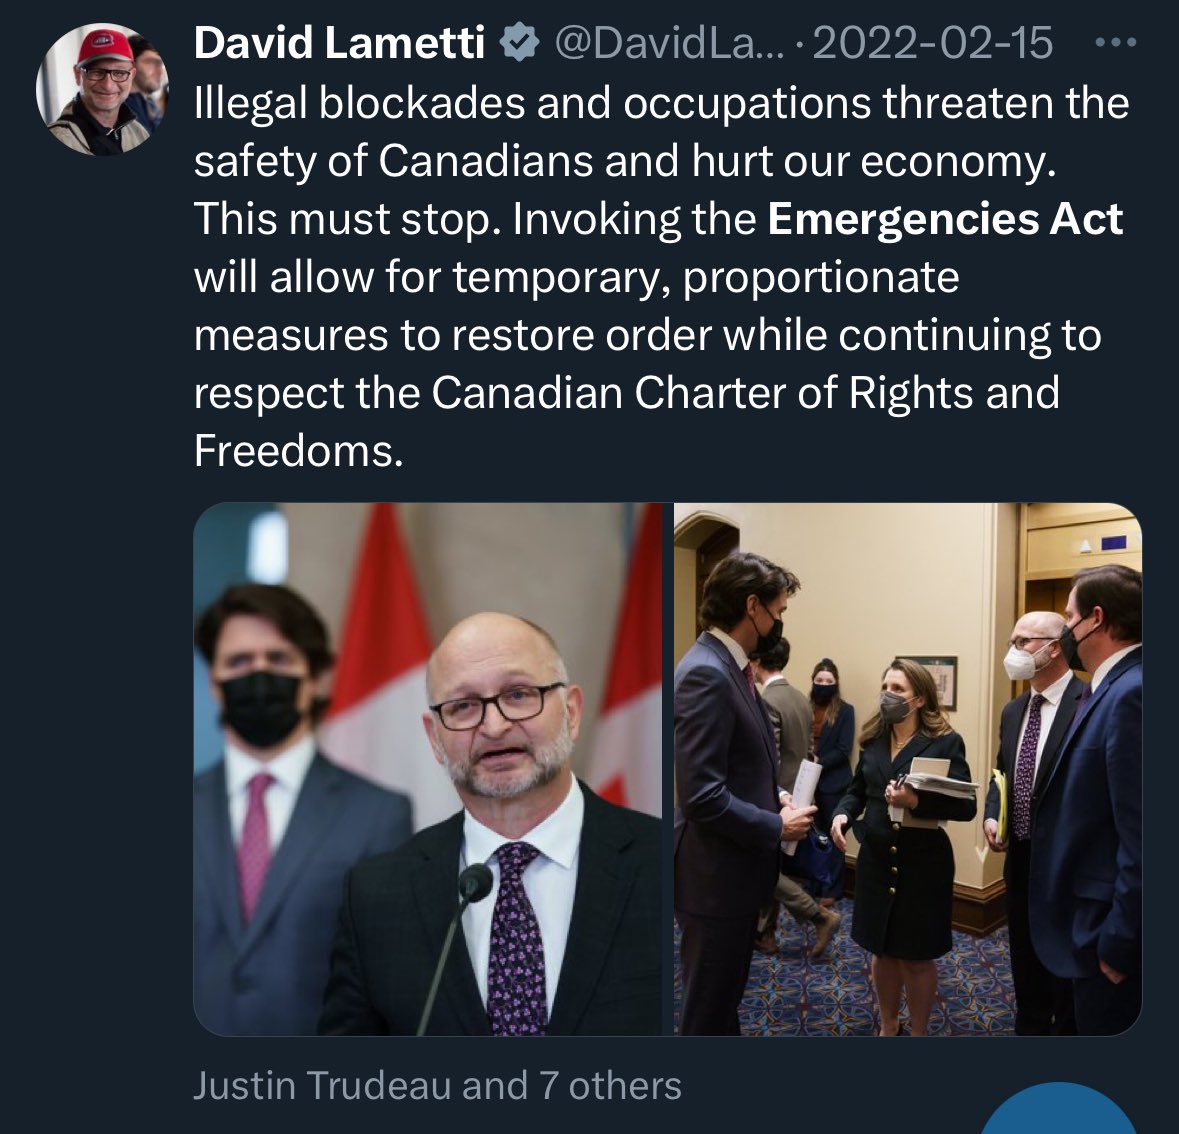 Turns out you violated the Canadian Charter of Rights and Freedoms. So much for respecting it.